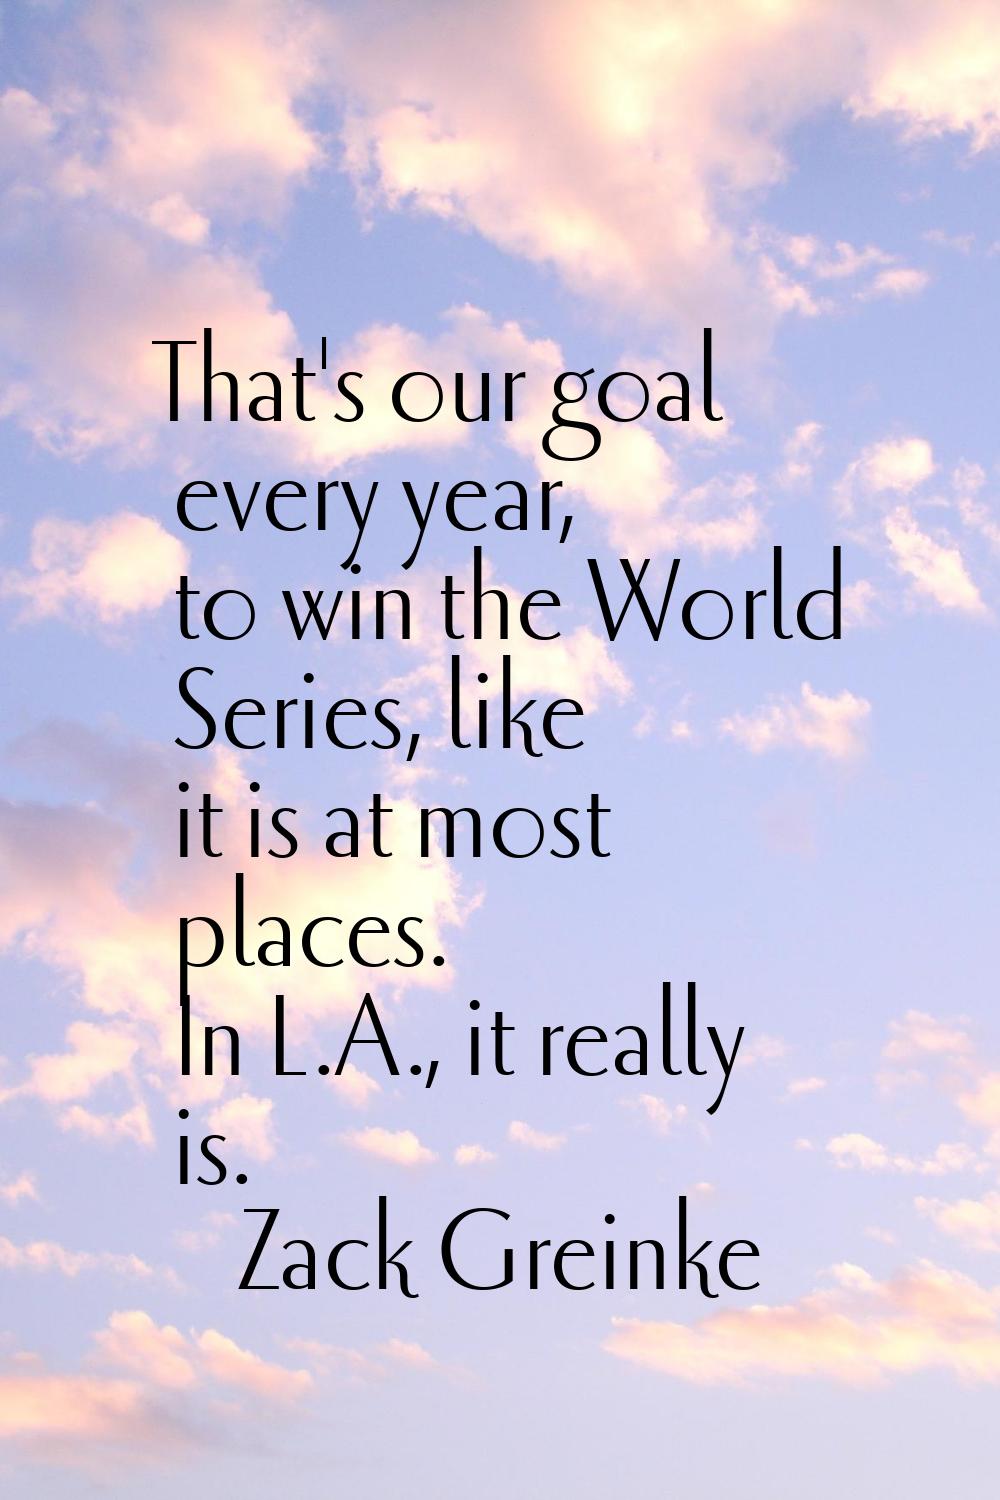 That's our goal every year, to win the World Series, like it is at most places. In L.A., it really 